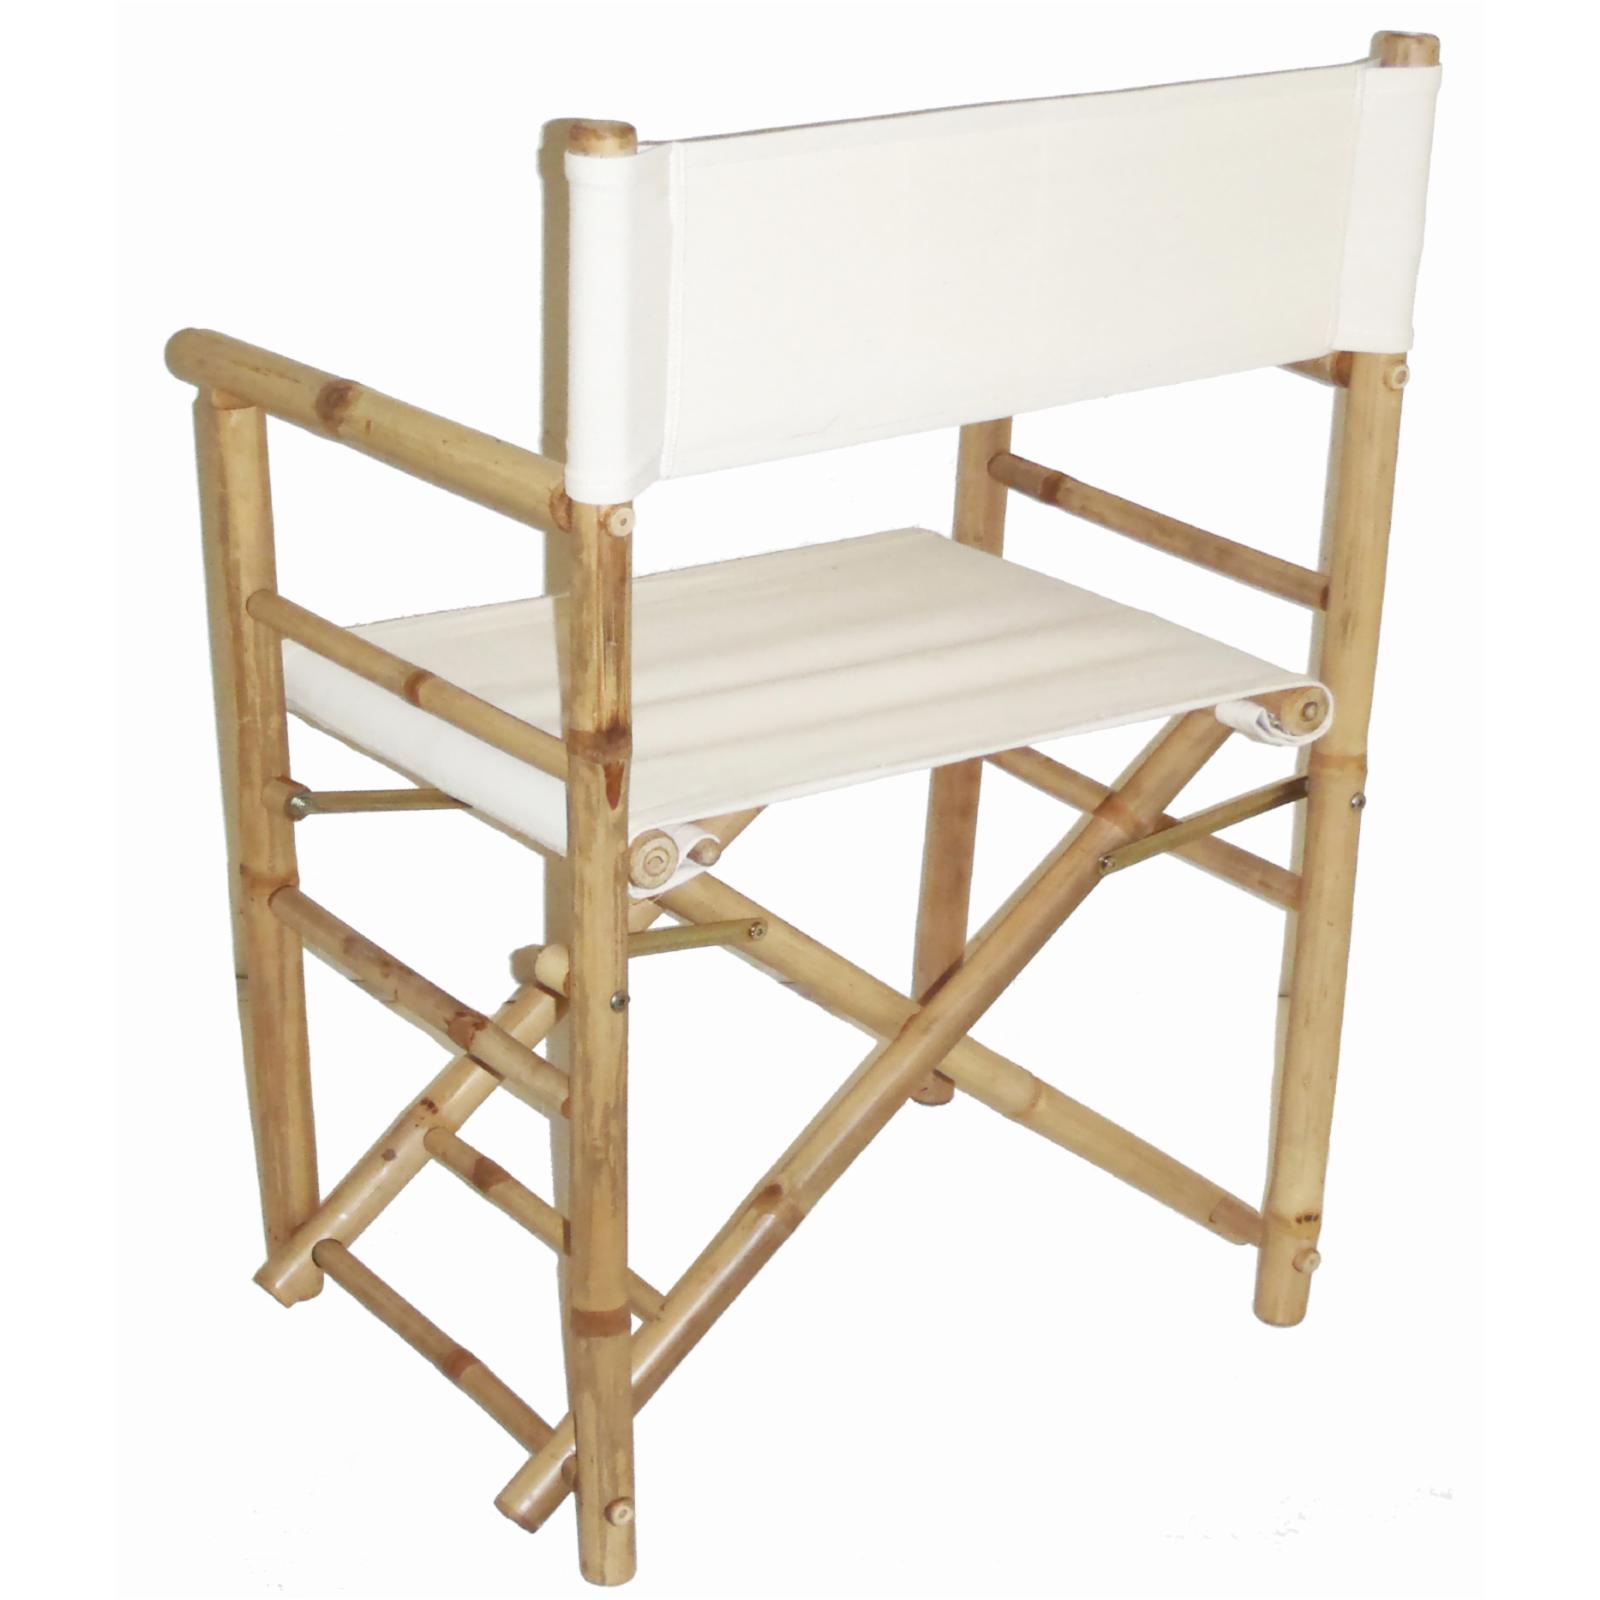 Bamboo54 Folding Bamboo Low Directors Chair with Canvas Cover - Set of 2 - image 4 of 5